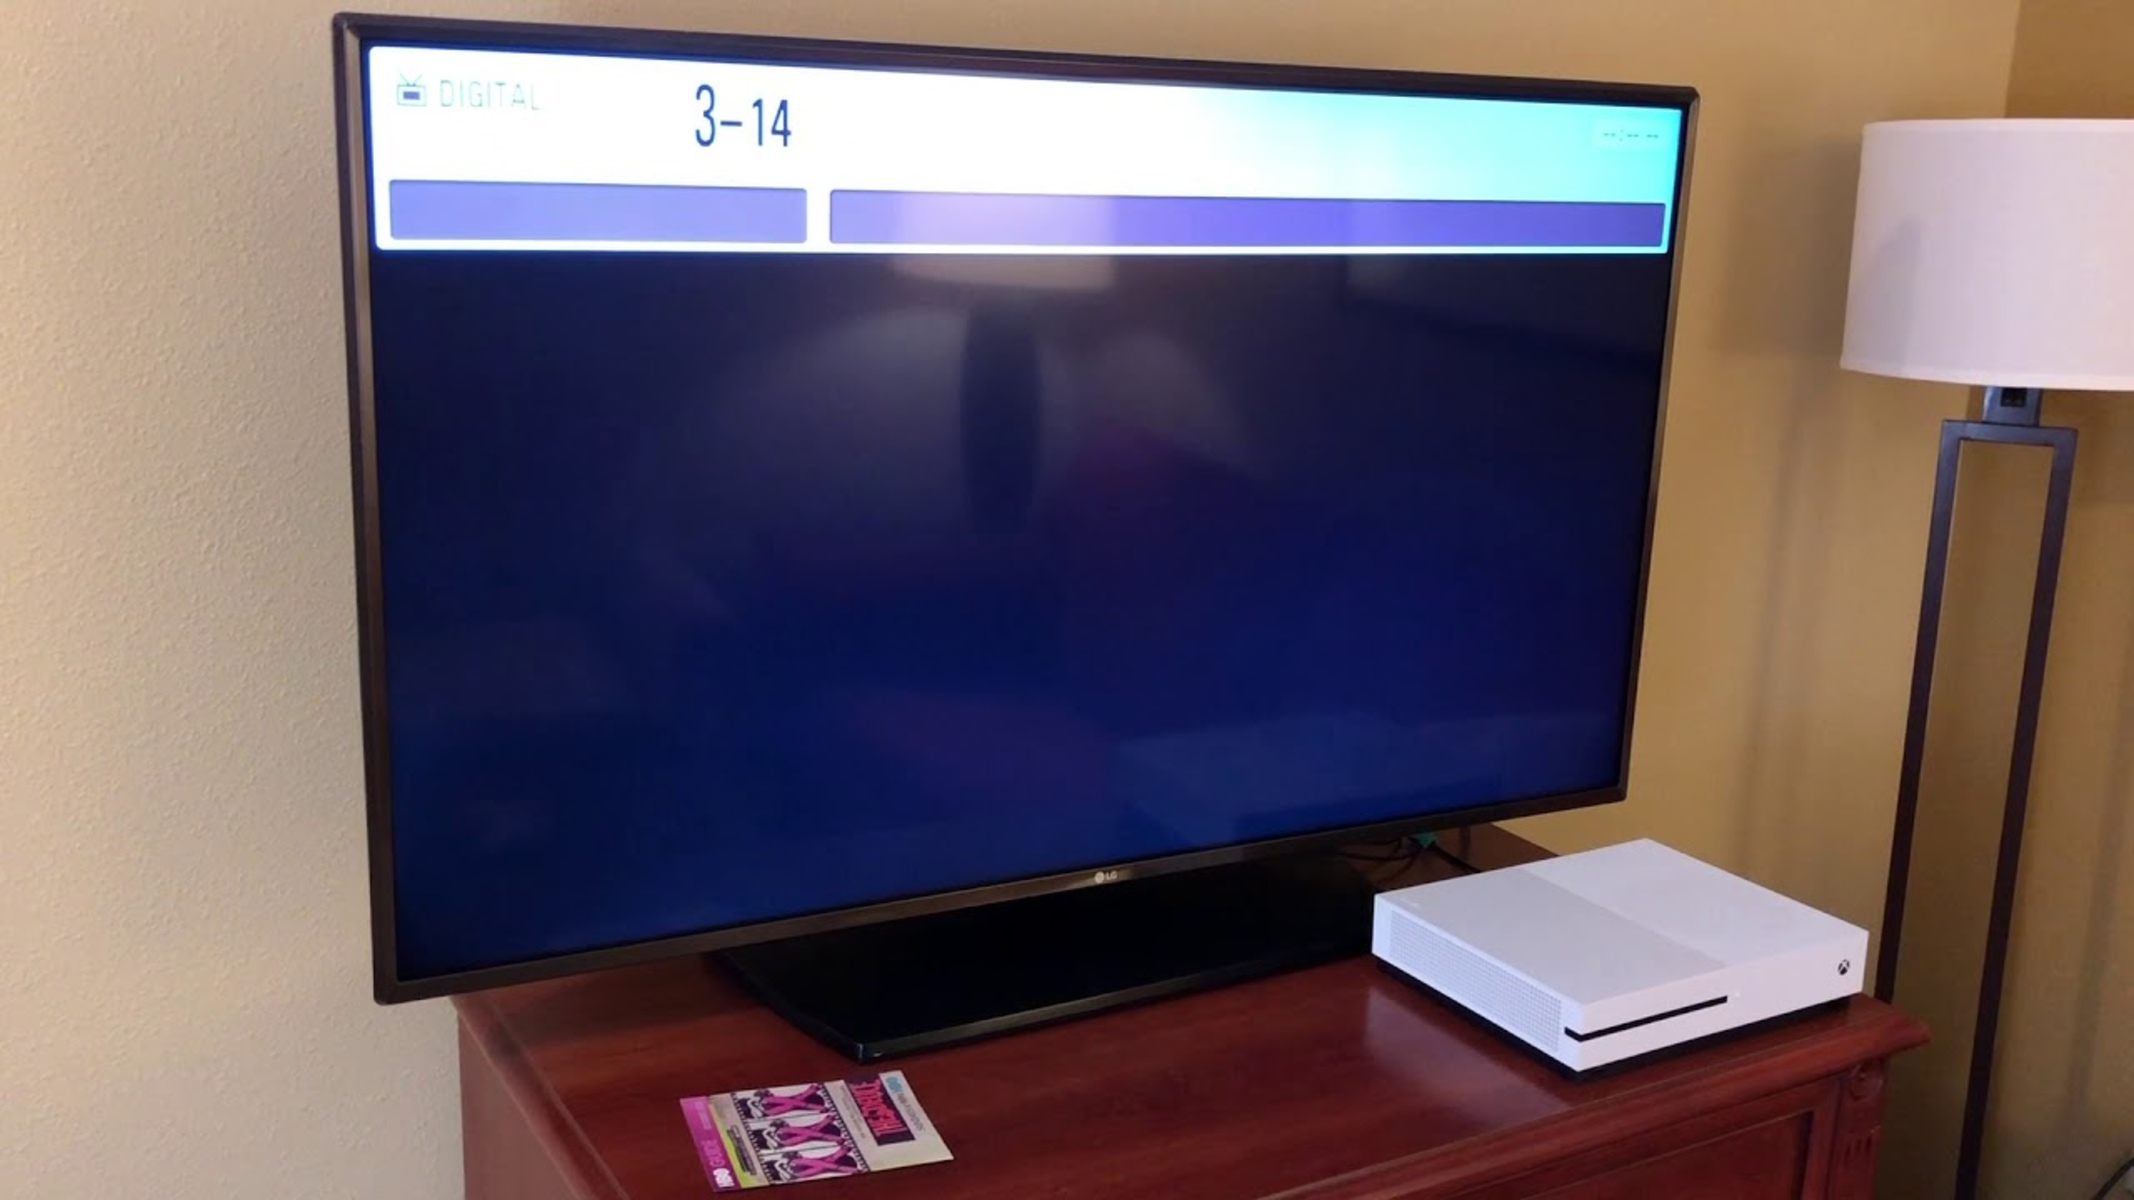 How To Change To HDMI On LG TV Without Remote